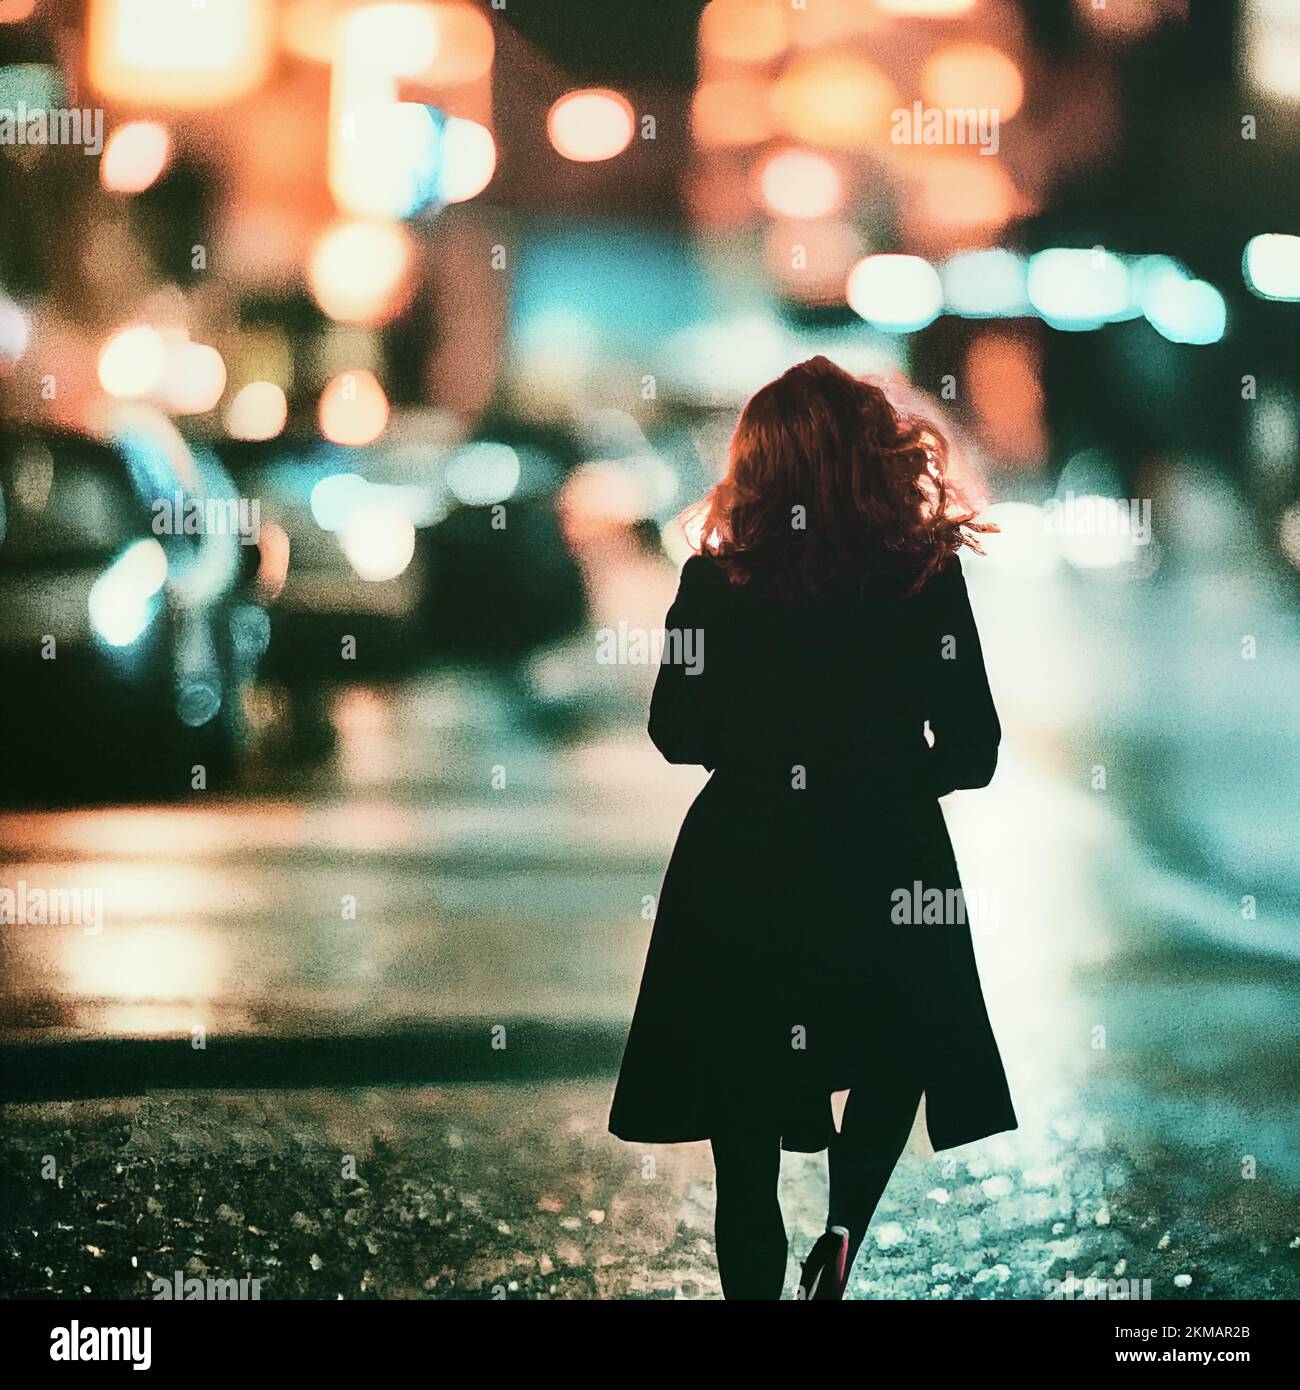 Young woman with red hairs run on a urban street at night, digital art illustration Stock Photo